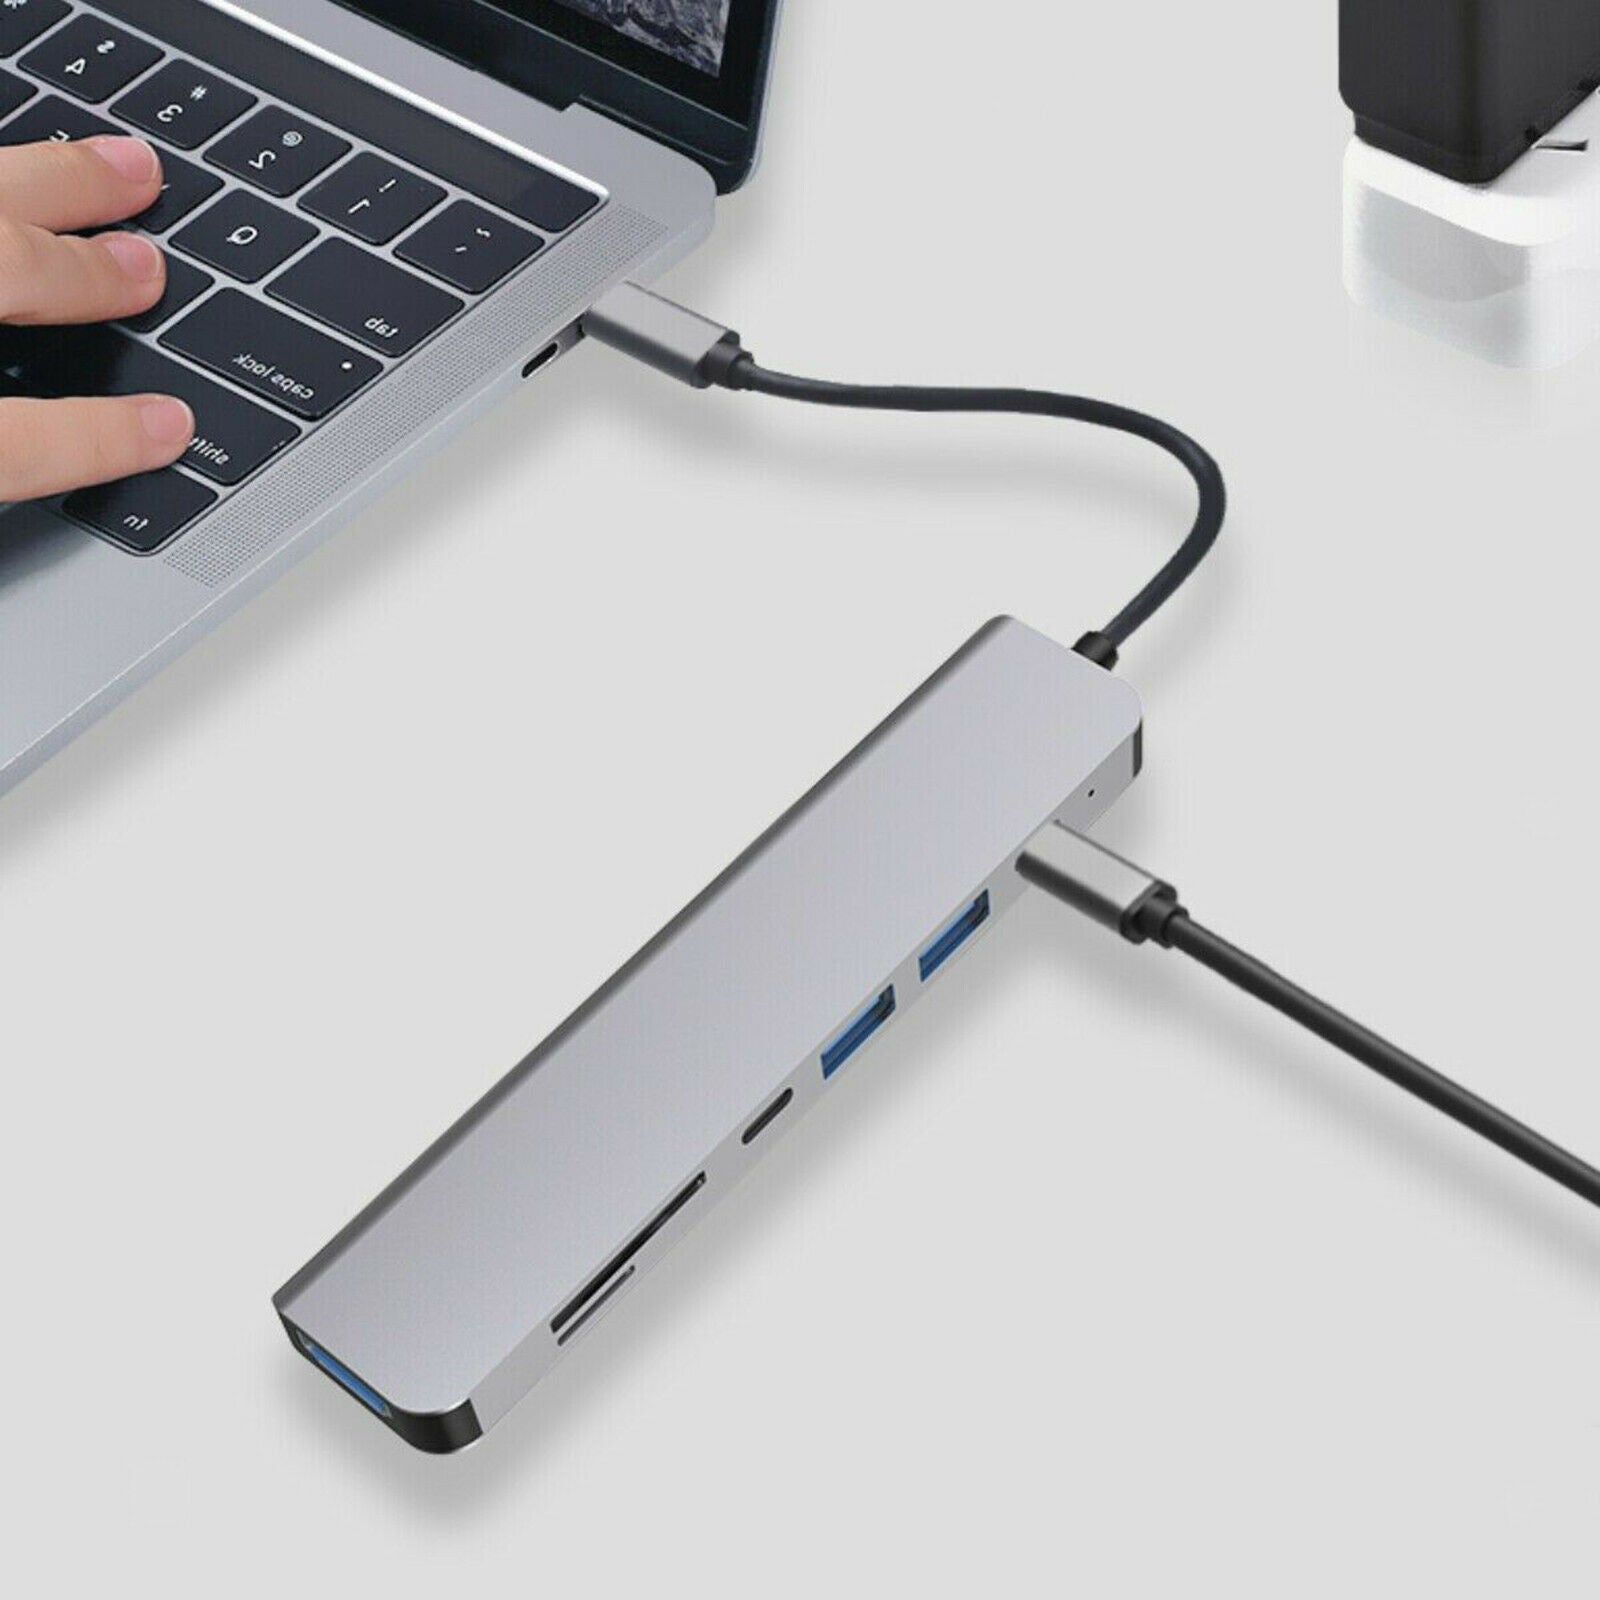 New Type C to USB-C Adapter Cable 7 in 1 Hub Dock PD Charge for MacBook